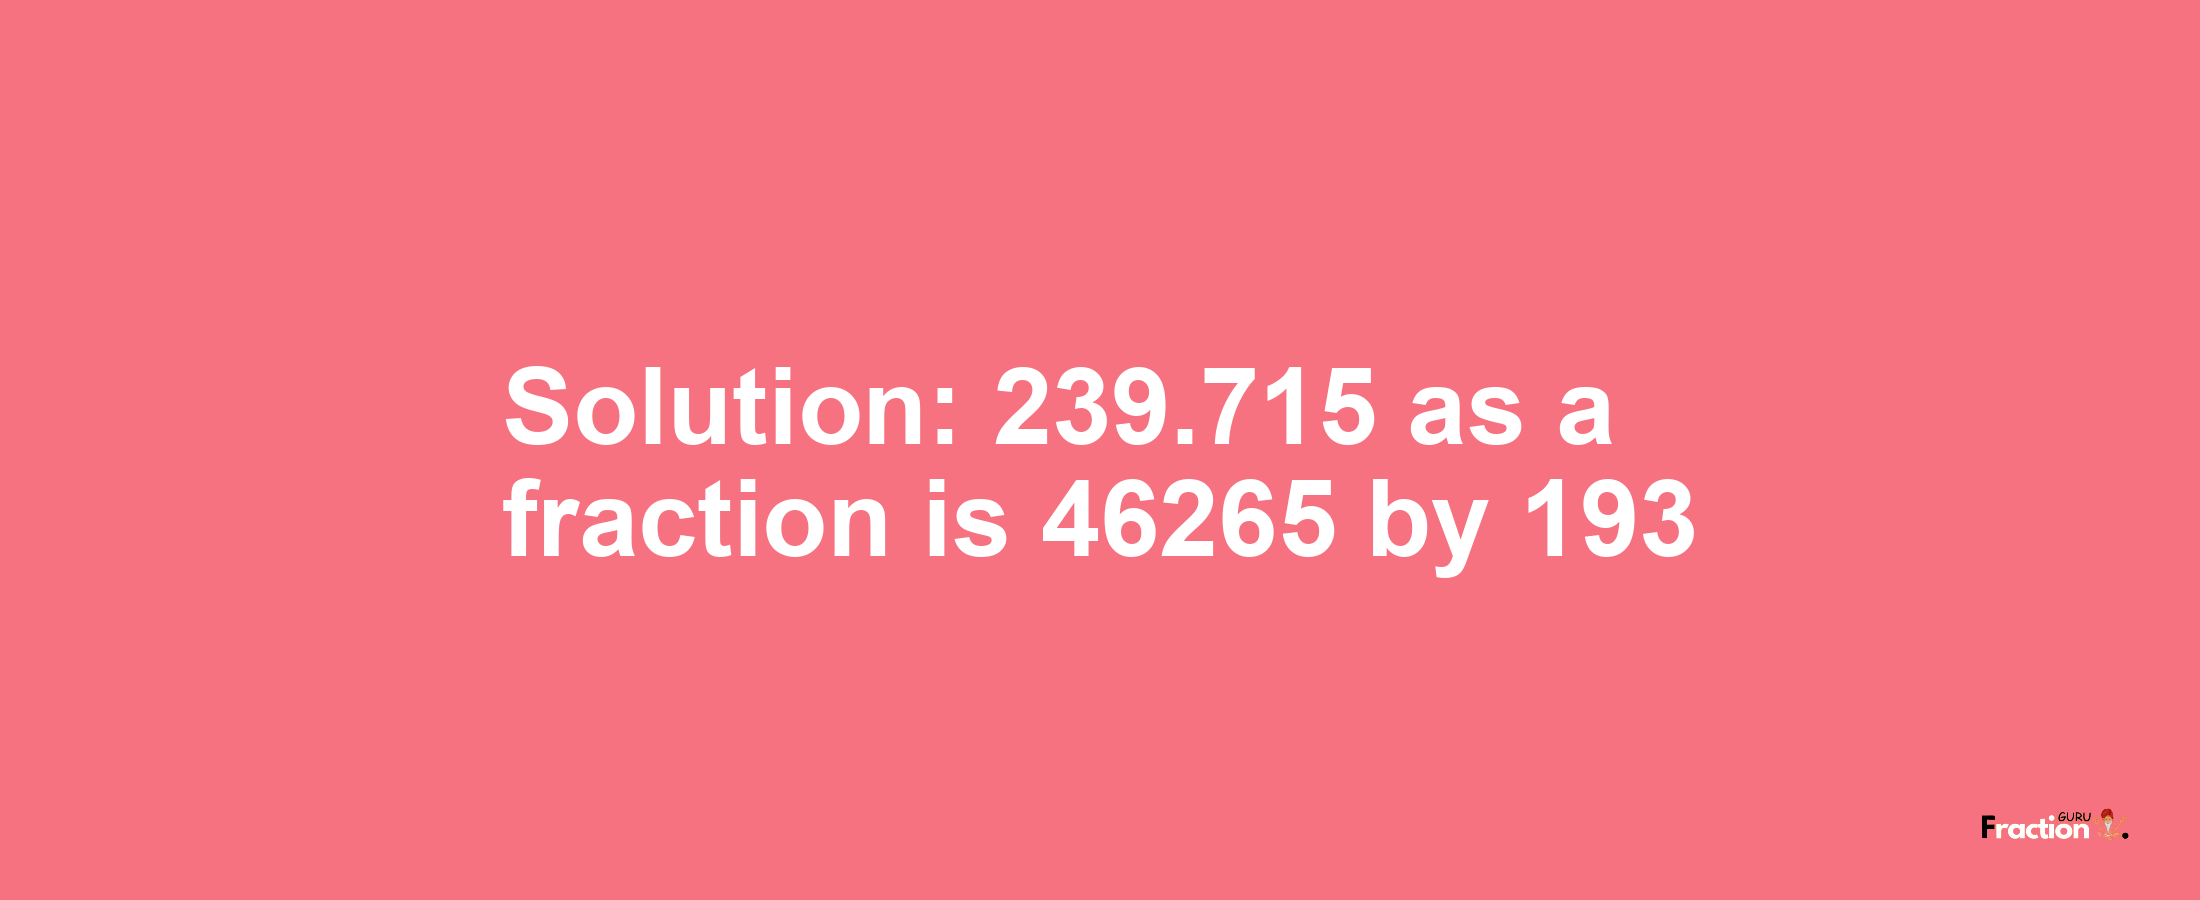 Solution:239.715 as a fraction is 46265/193